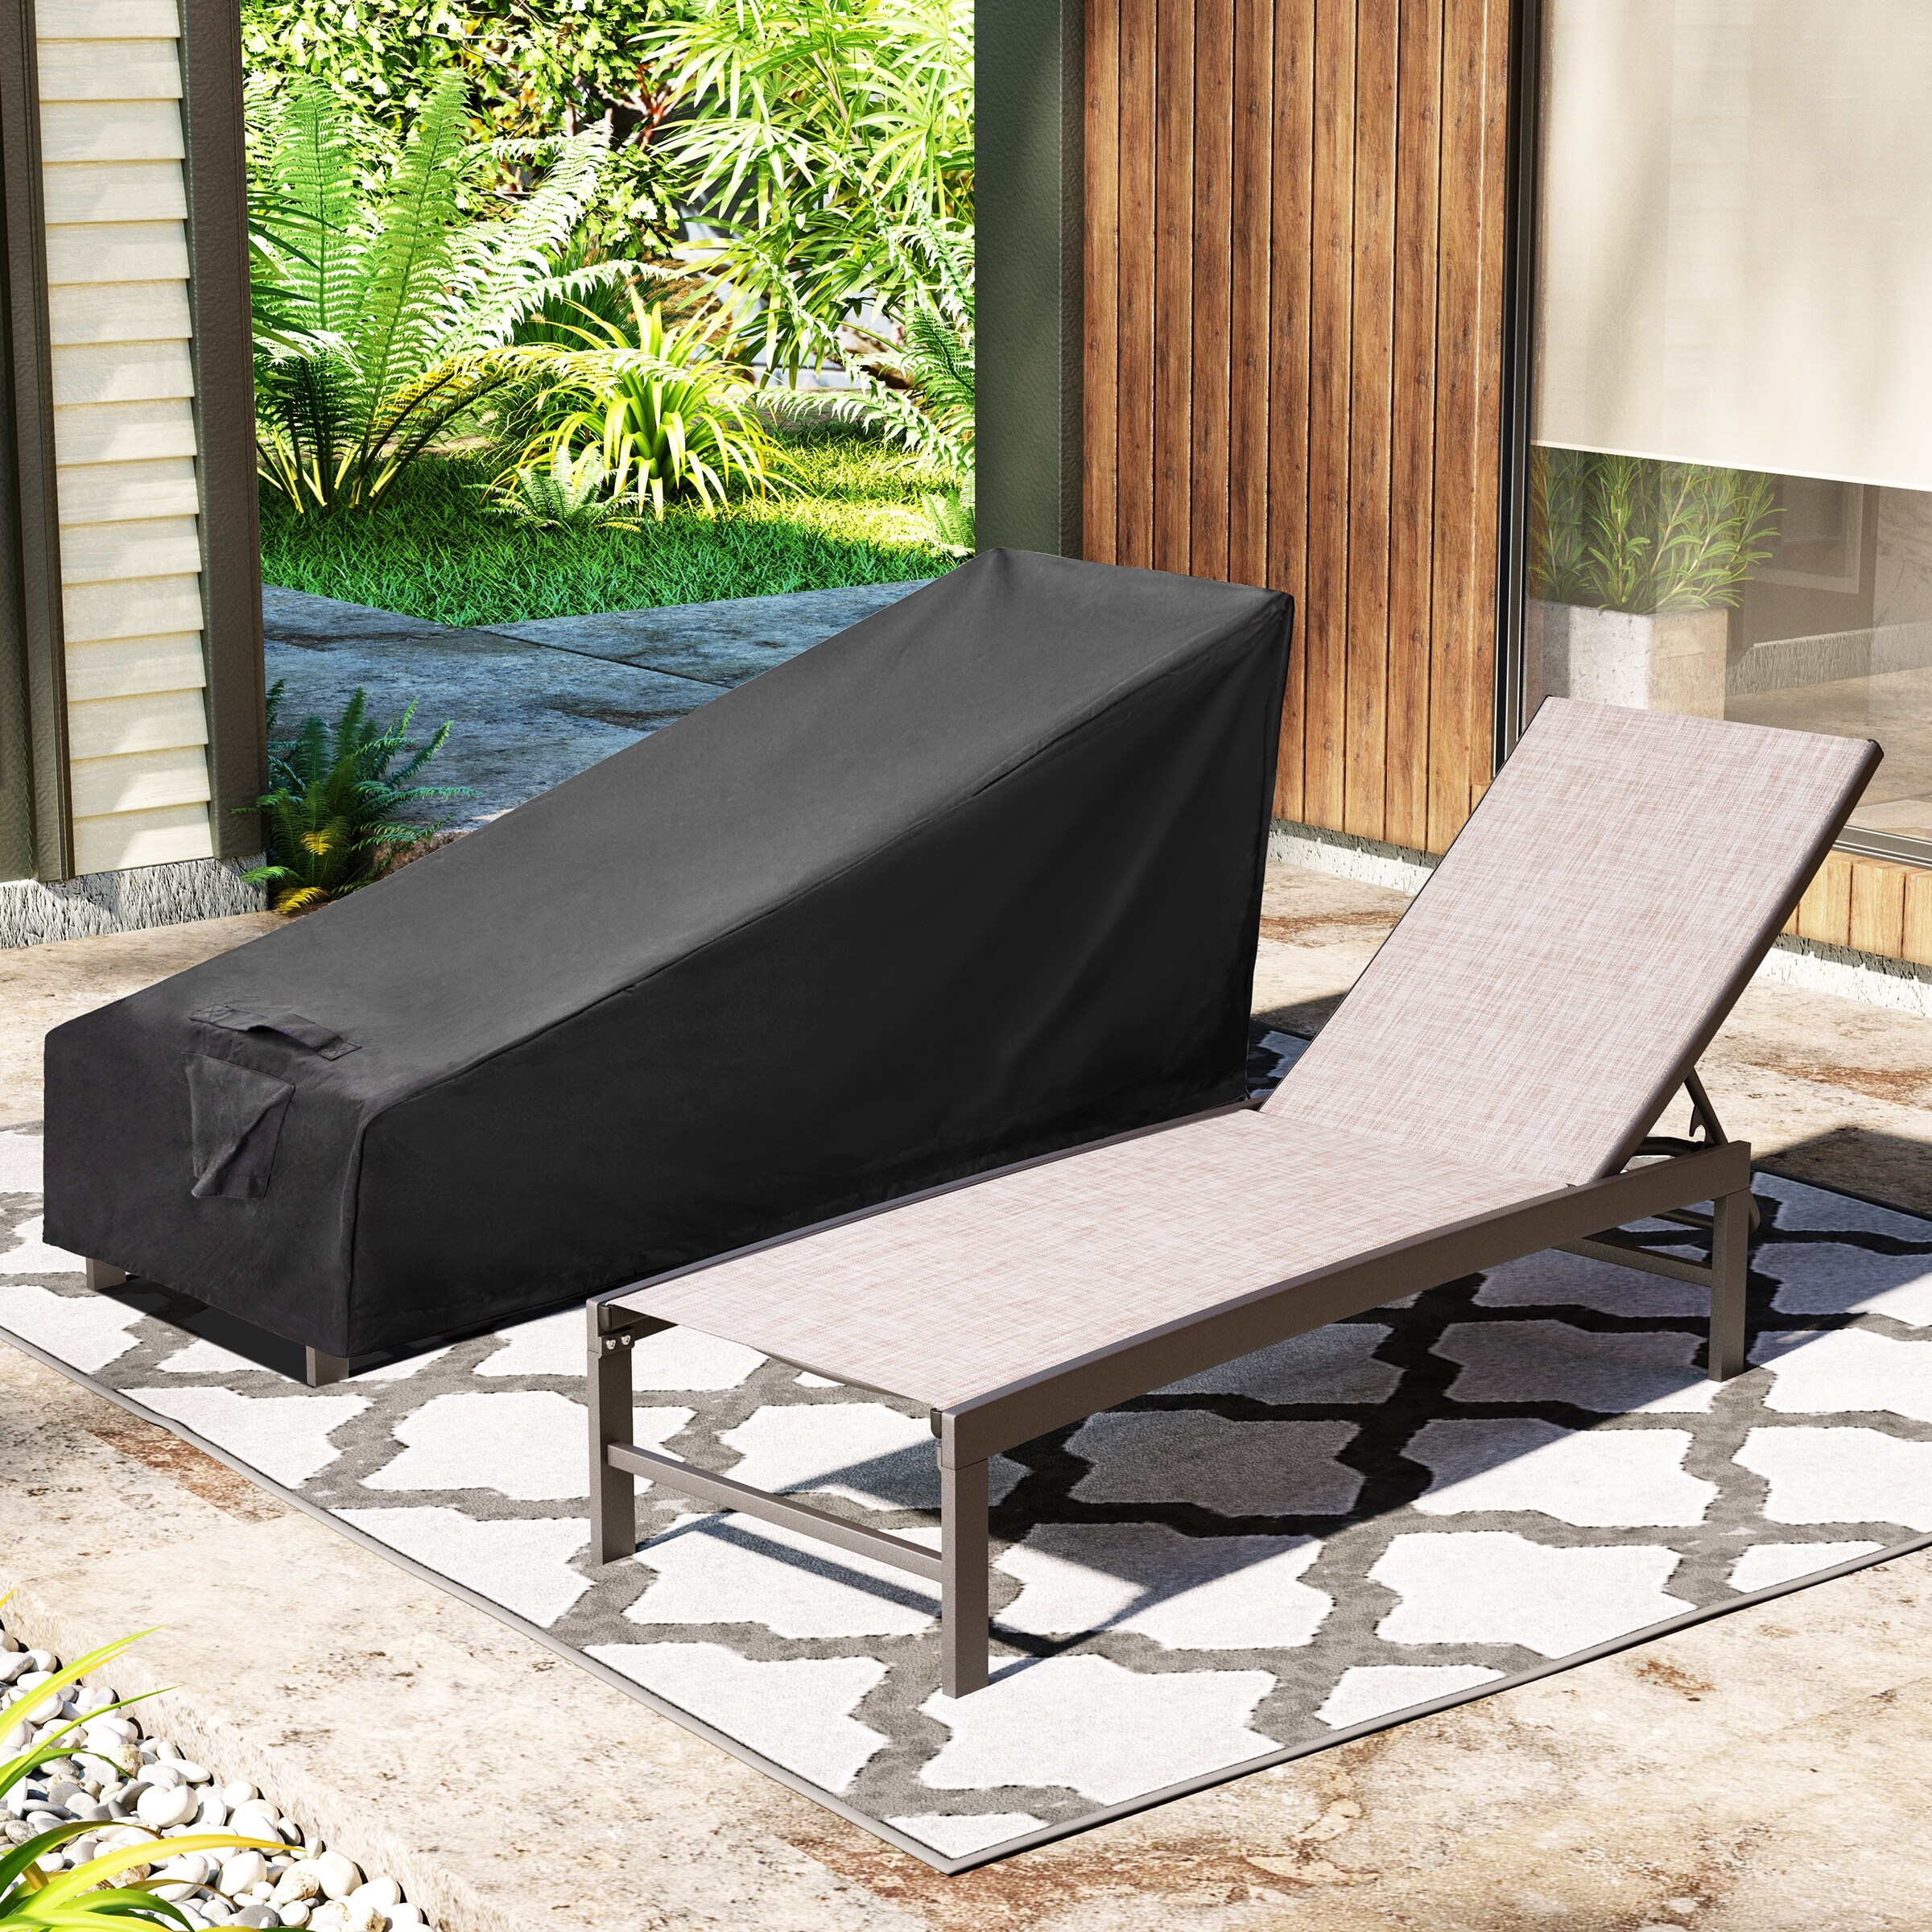 Crestlive Products Patio chaise lounge Set of 2 Aluminum Frame In